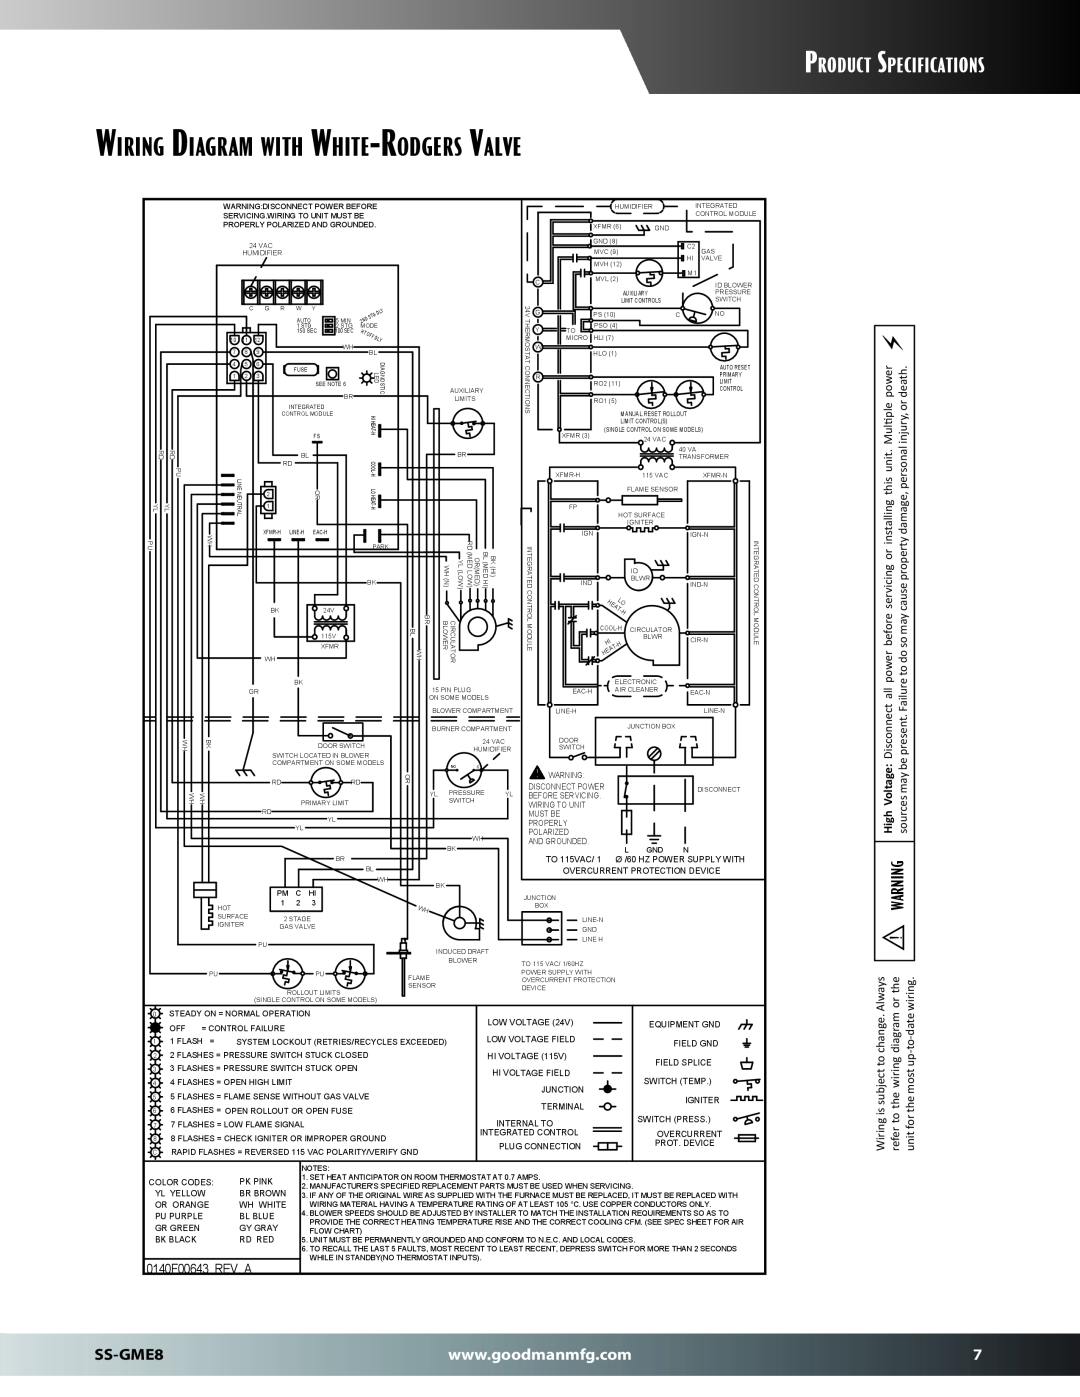 Goodman Mfg SS-GME8 dimensions Product Specifications, Wiring Diagram with White-Rodgers Valve, 0140F00643 REV. A 